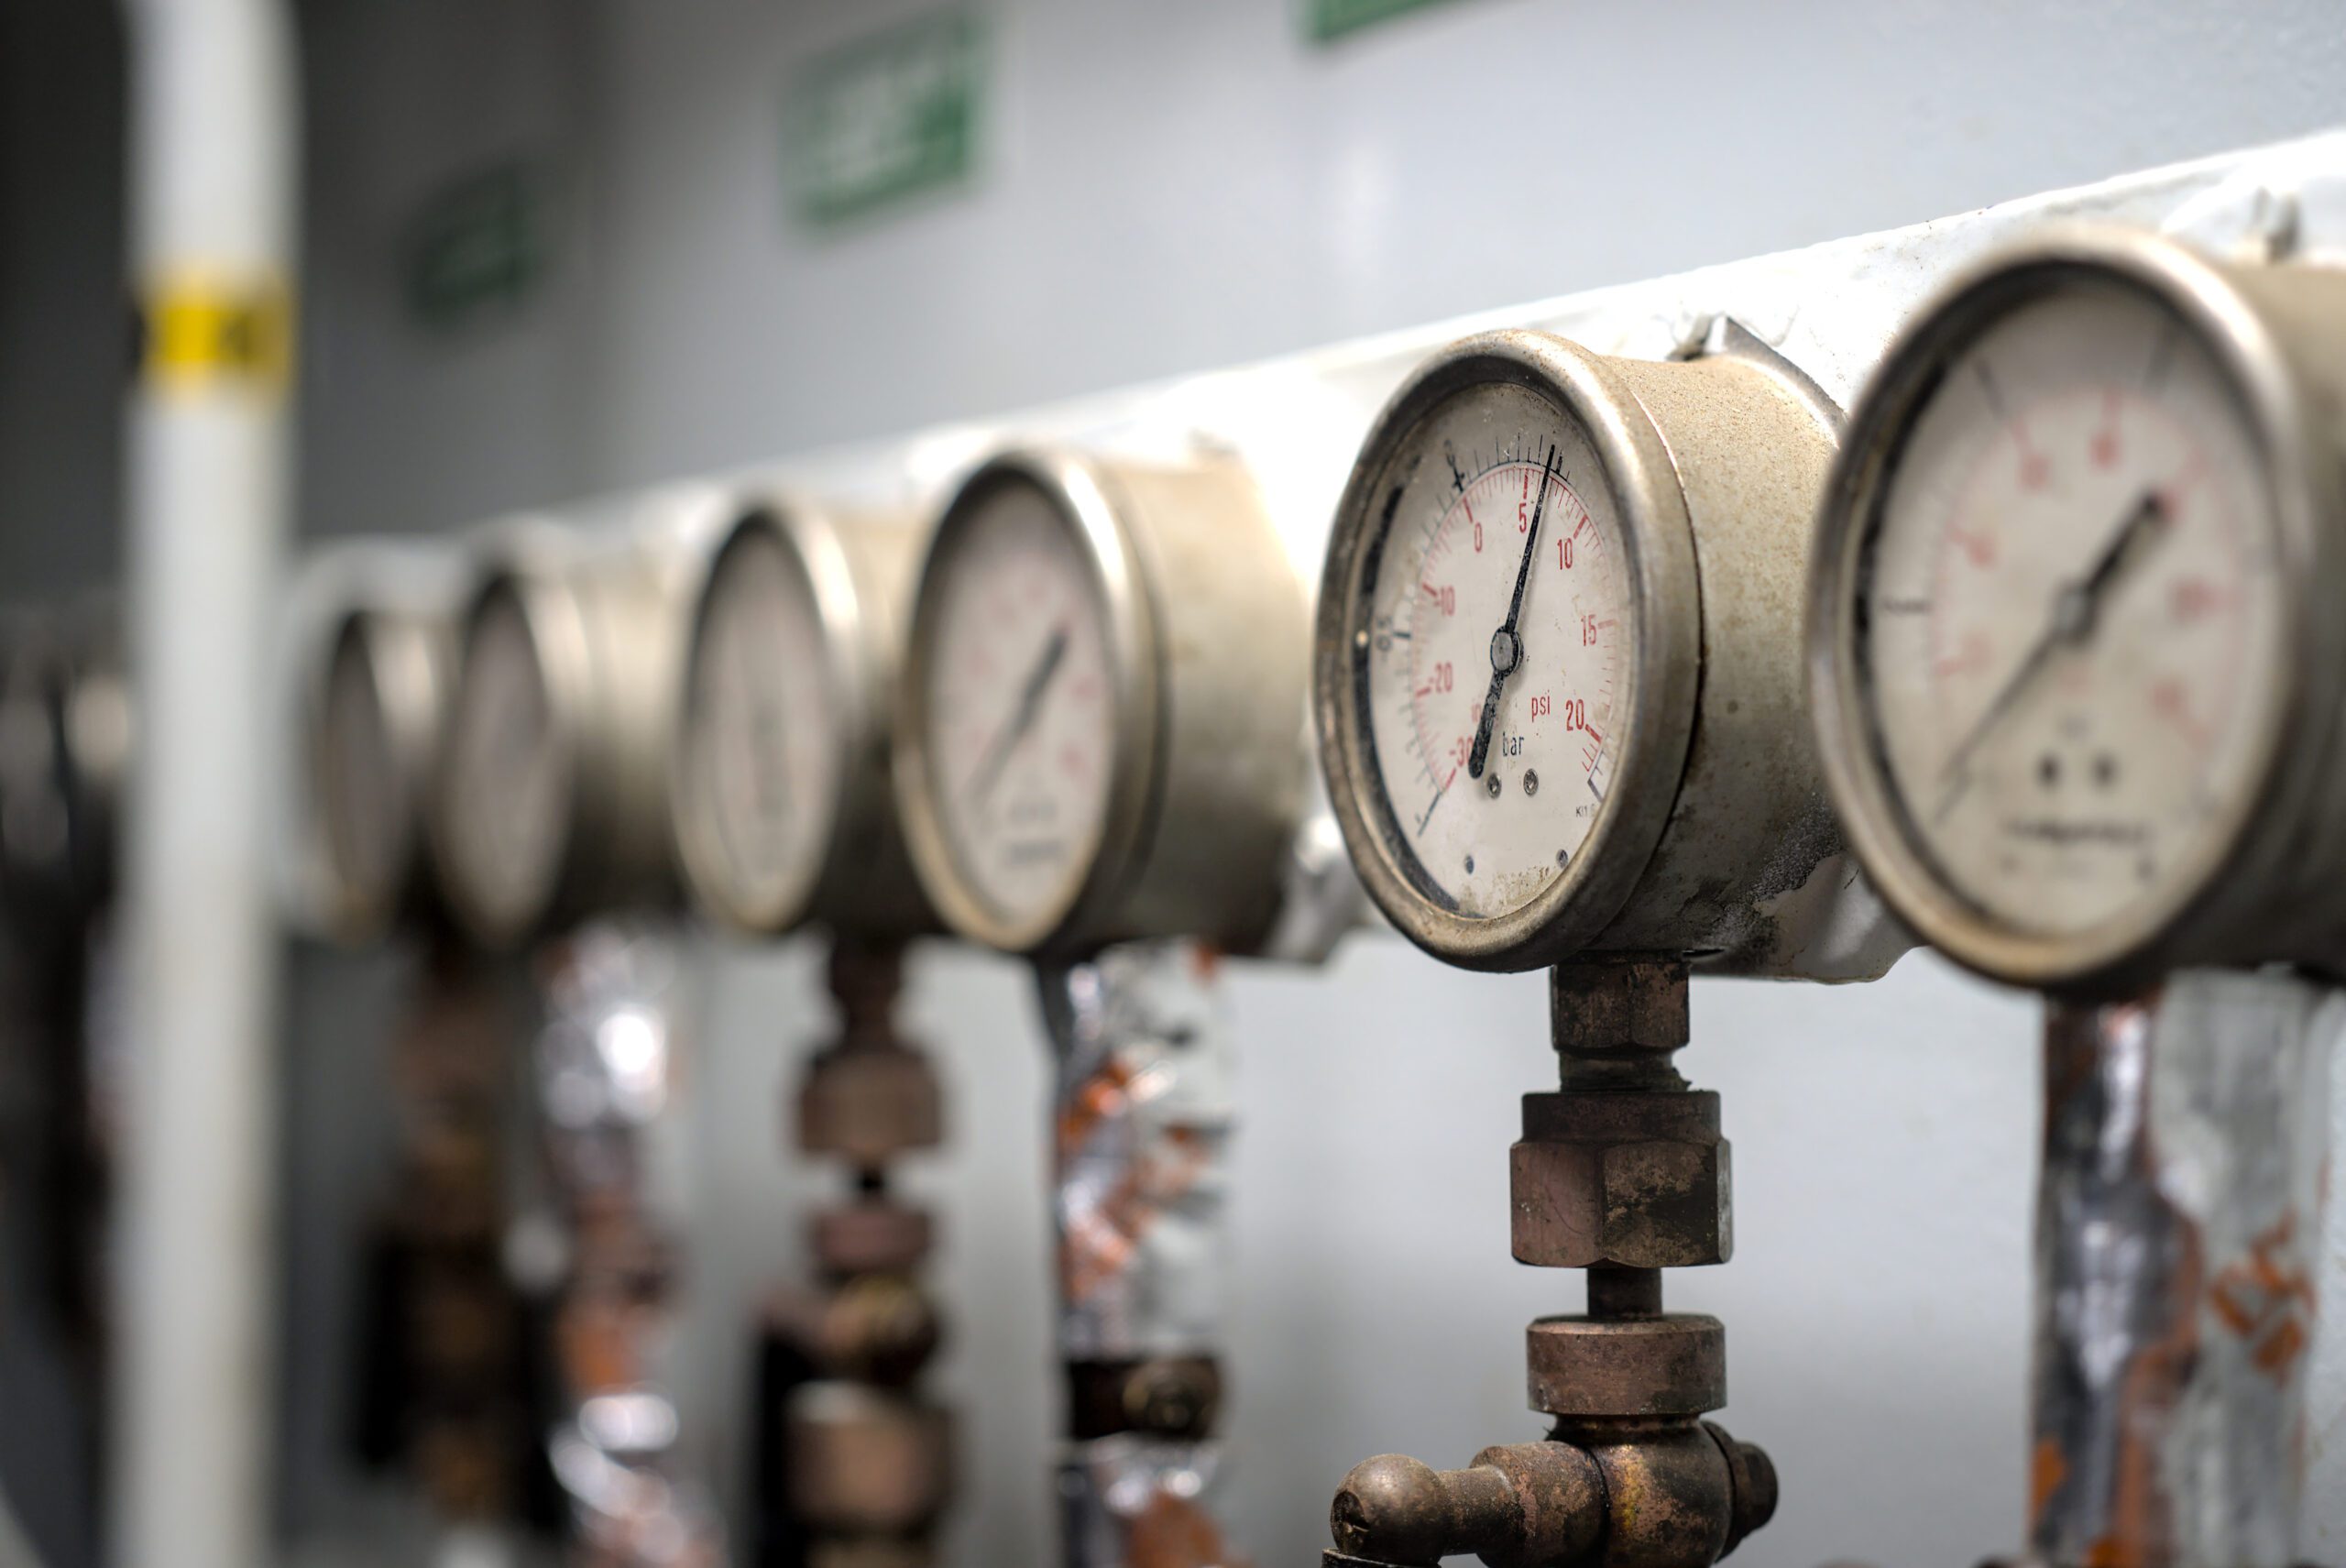 Pressure gauge psi meter in pipe and valves of water, oil and gas system industry